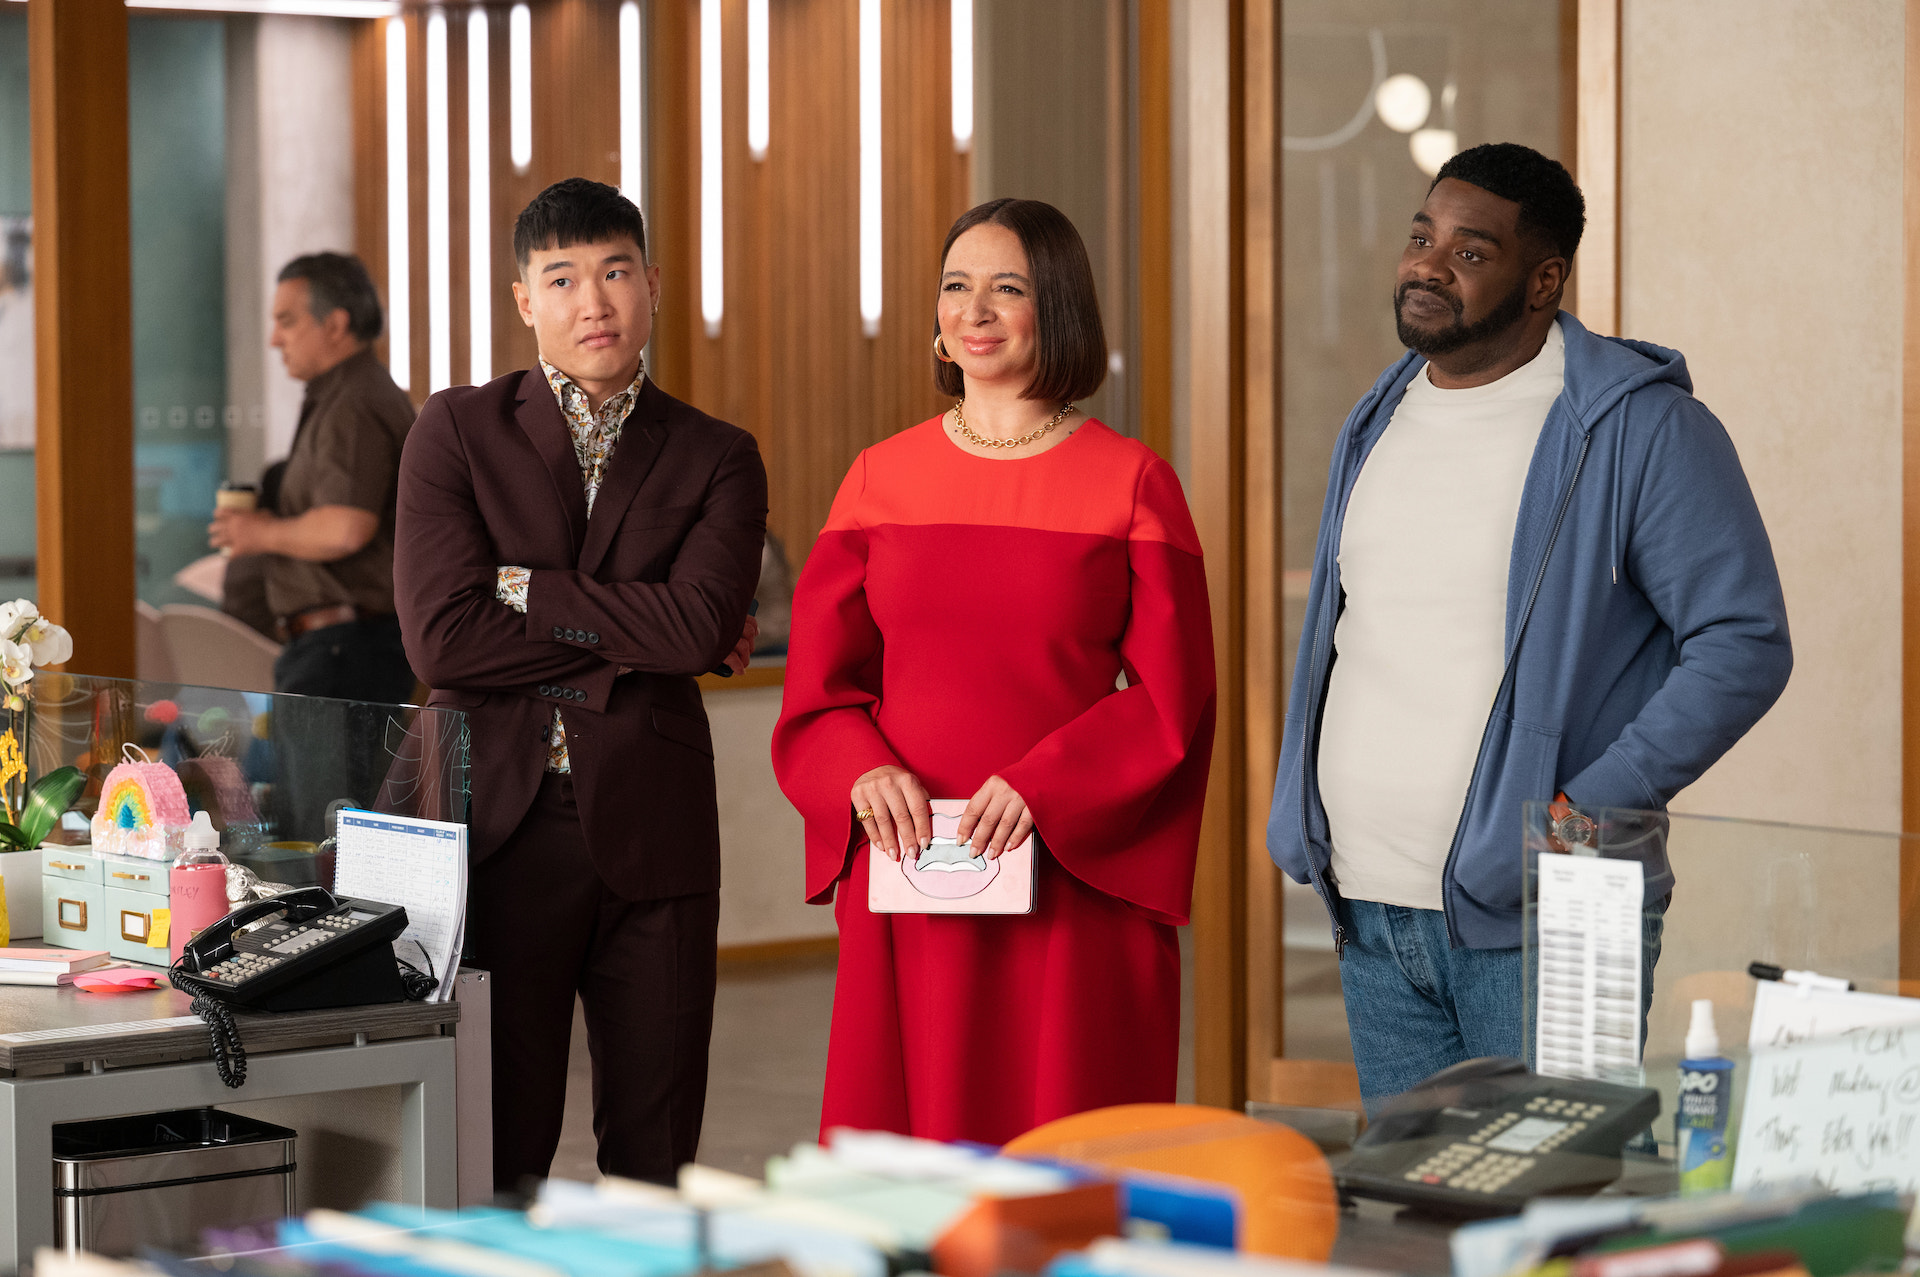 Apple TV+ announced yesterday, July 11, that the beloved comedy series Loot starring and co-produced by Maya Rudolph will be renewed for a second season. 